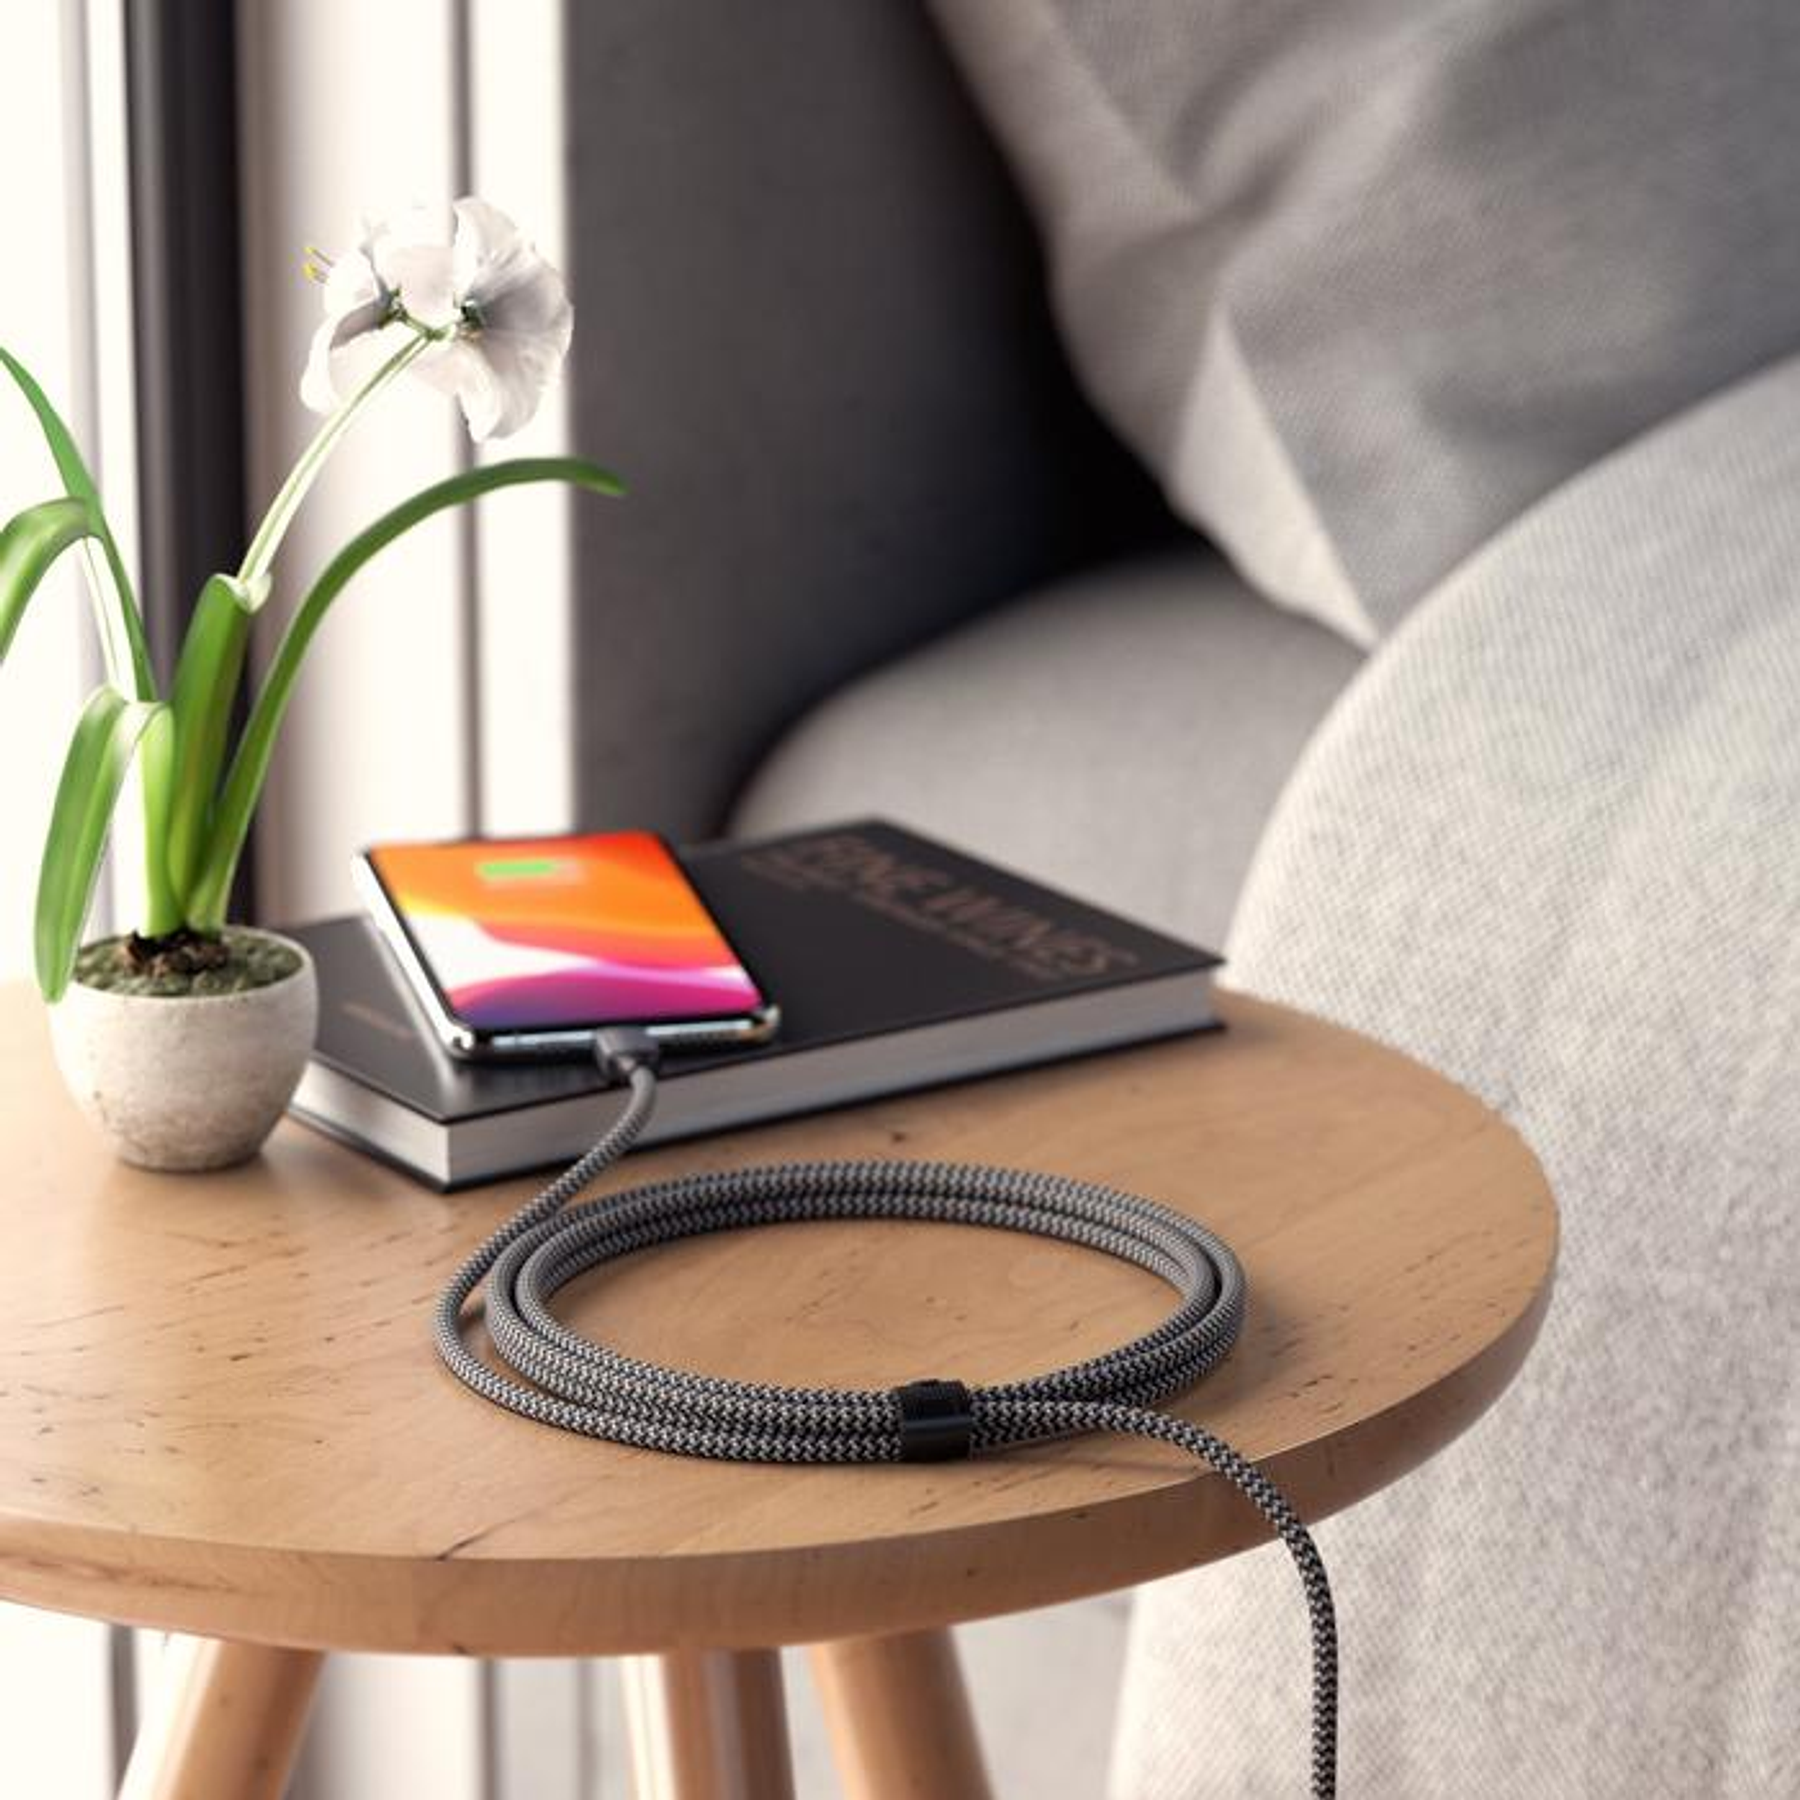 Satechi - USB-C to Lighting Cable MFI (space grey)